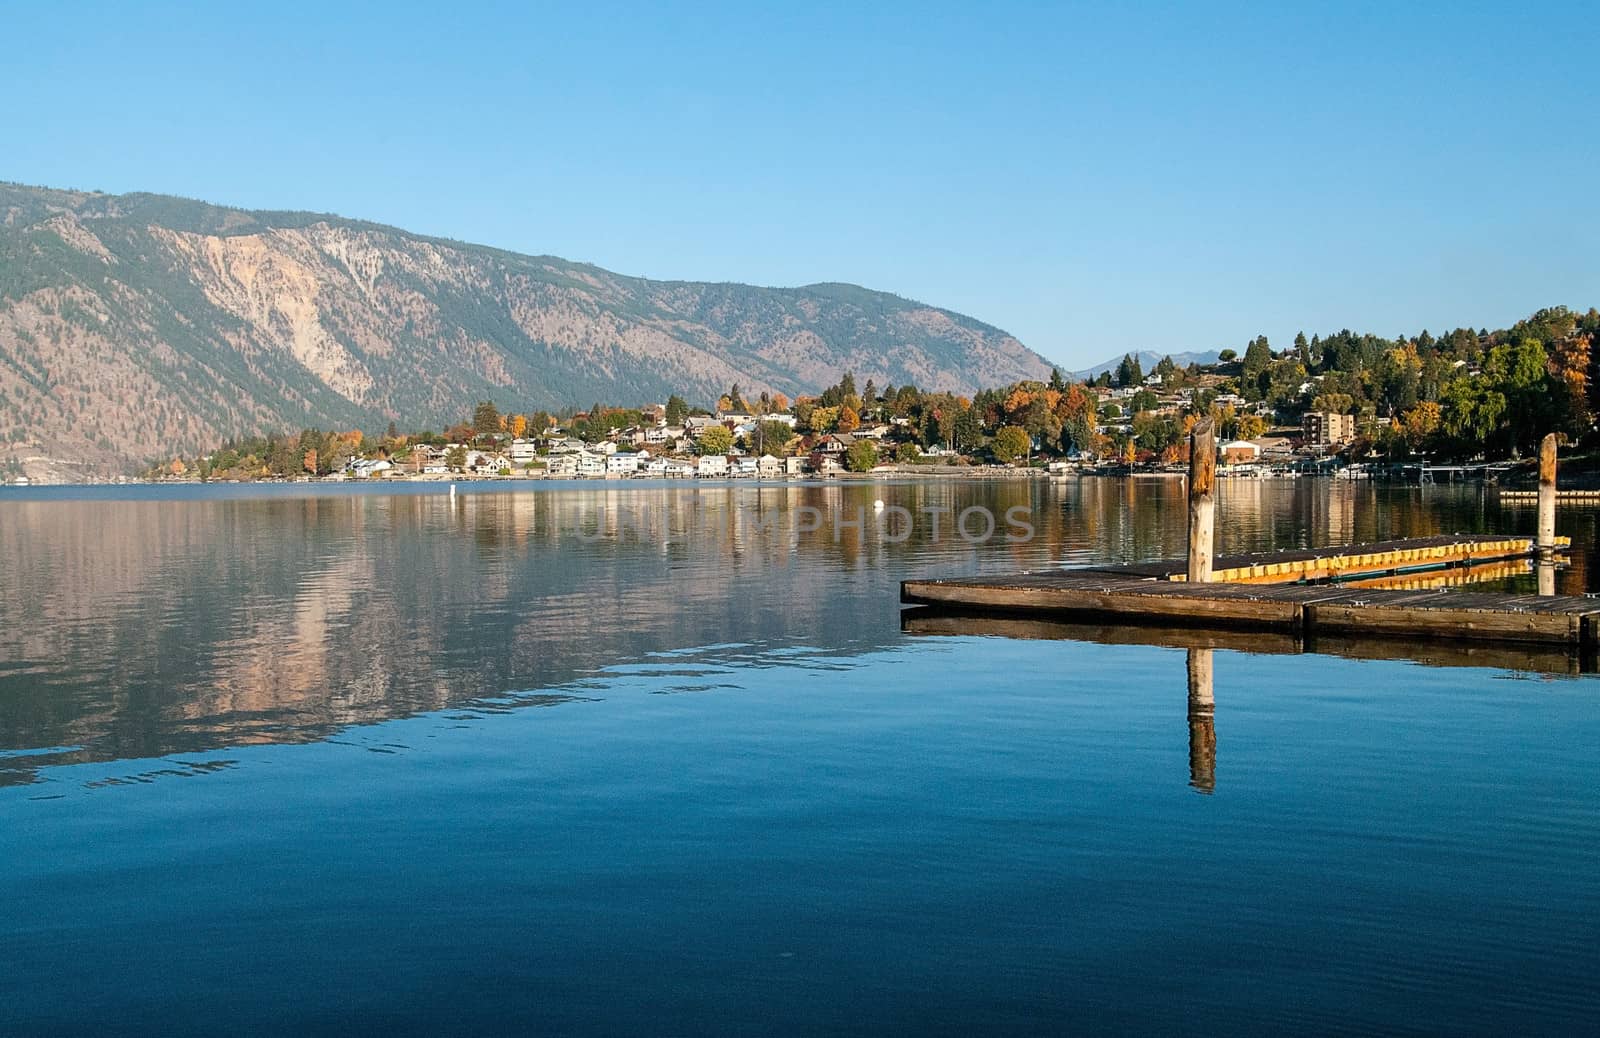 The view from the beach at the Wapato Resort of Lake Chelan